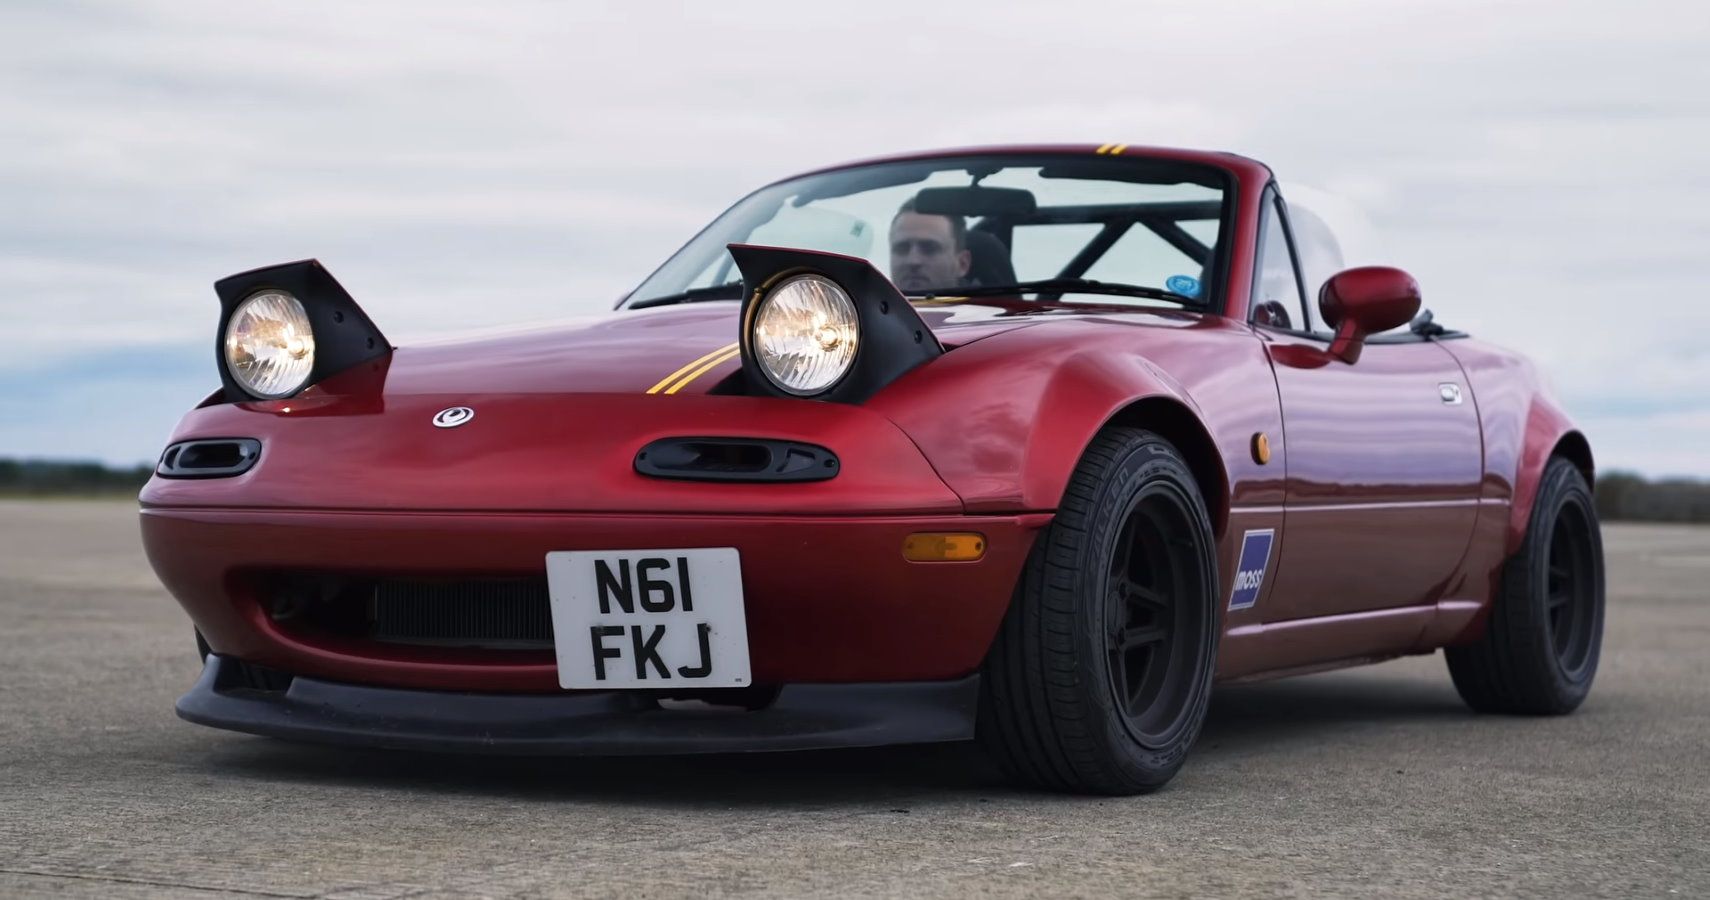 Supercharged Miata Takes On V6 Swapped Mx 5 In Tiny Drag Race